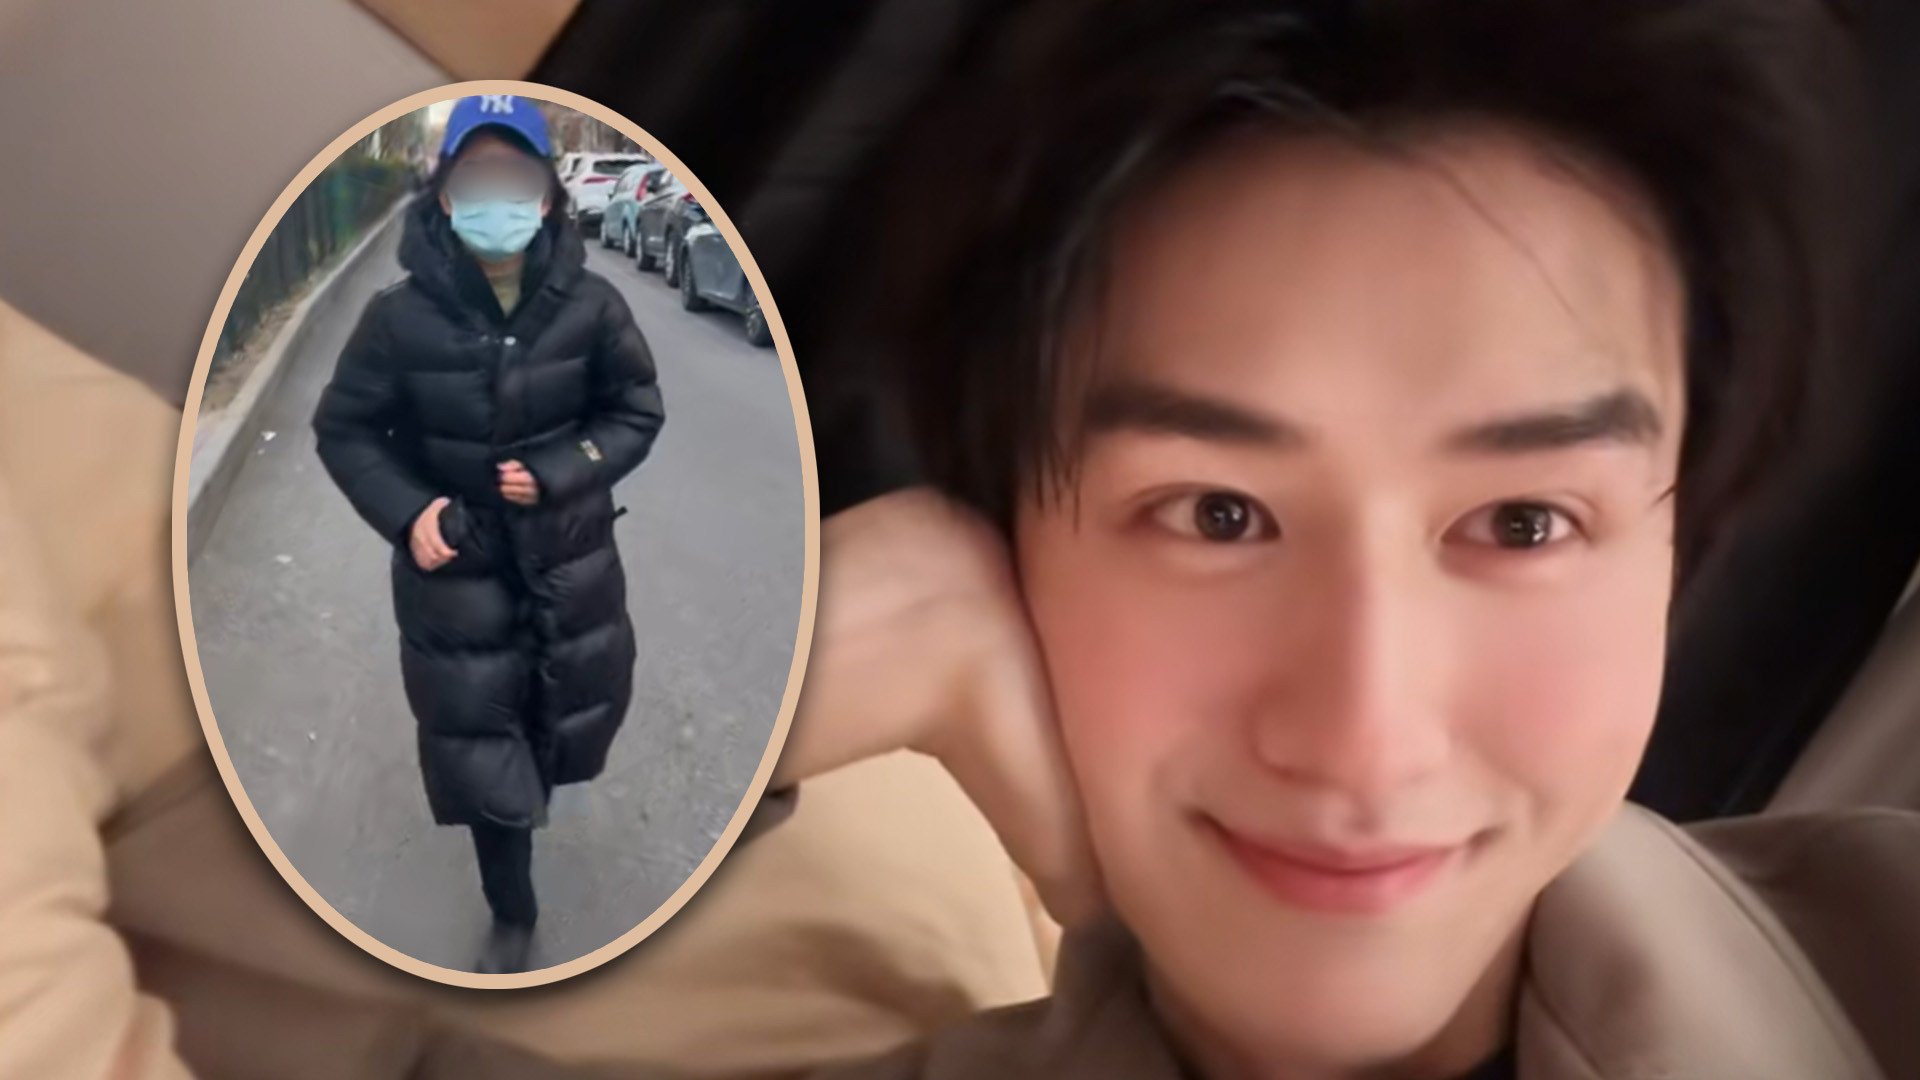 A “handsome” Beijing man has claimed he was harassed, chased, and hugged by a woman on the streets of China’s capital. Photo: SCMP composite/Douyin